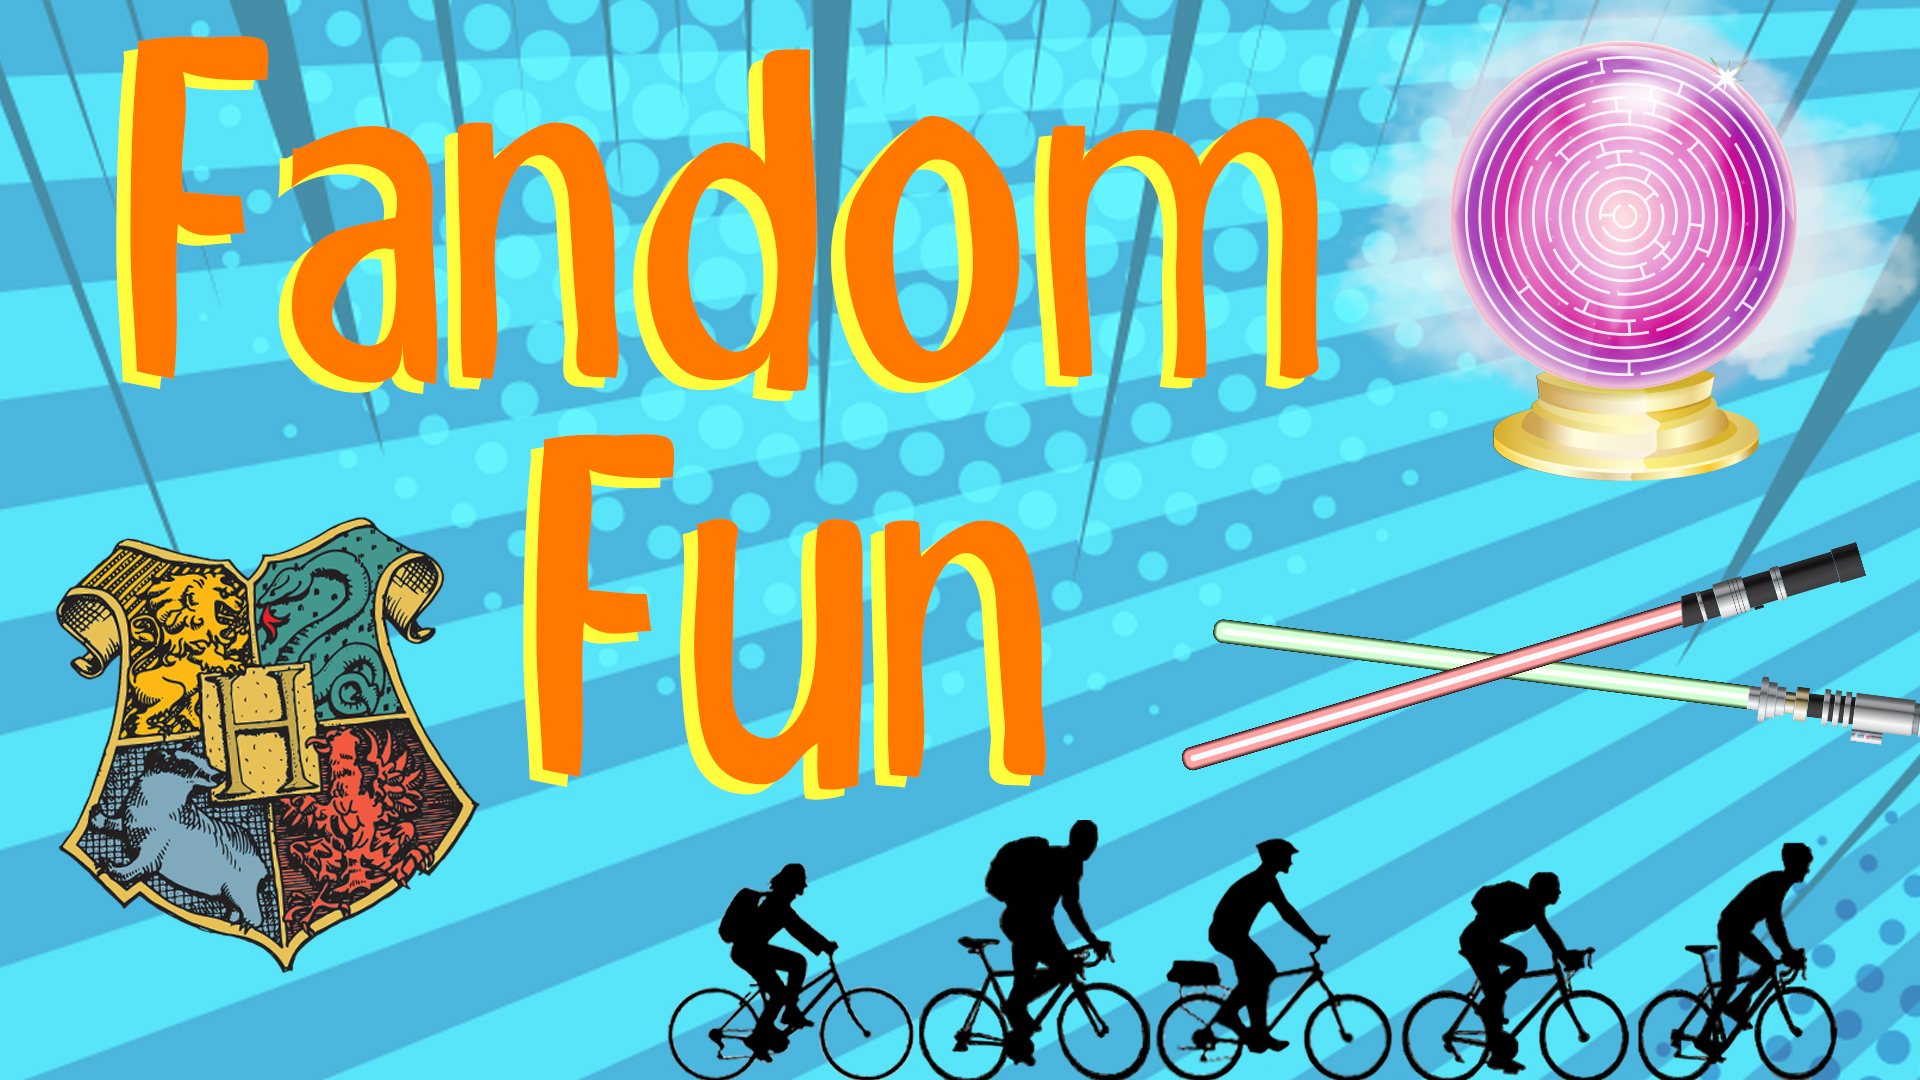 Image reads "Fandom Fun" against a comic book background. A Harry Potter house crest is to the left of the title. A crystal ball and two lightsabers are to the right of the title. The silhouettes of 5 kids on bikes are under the title.